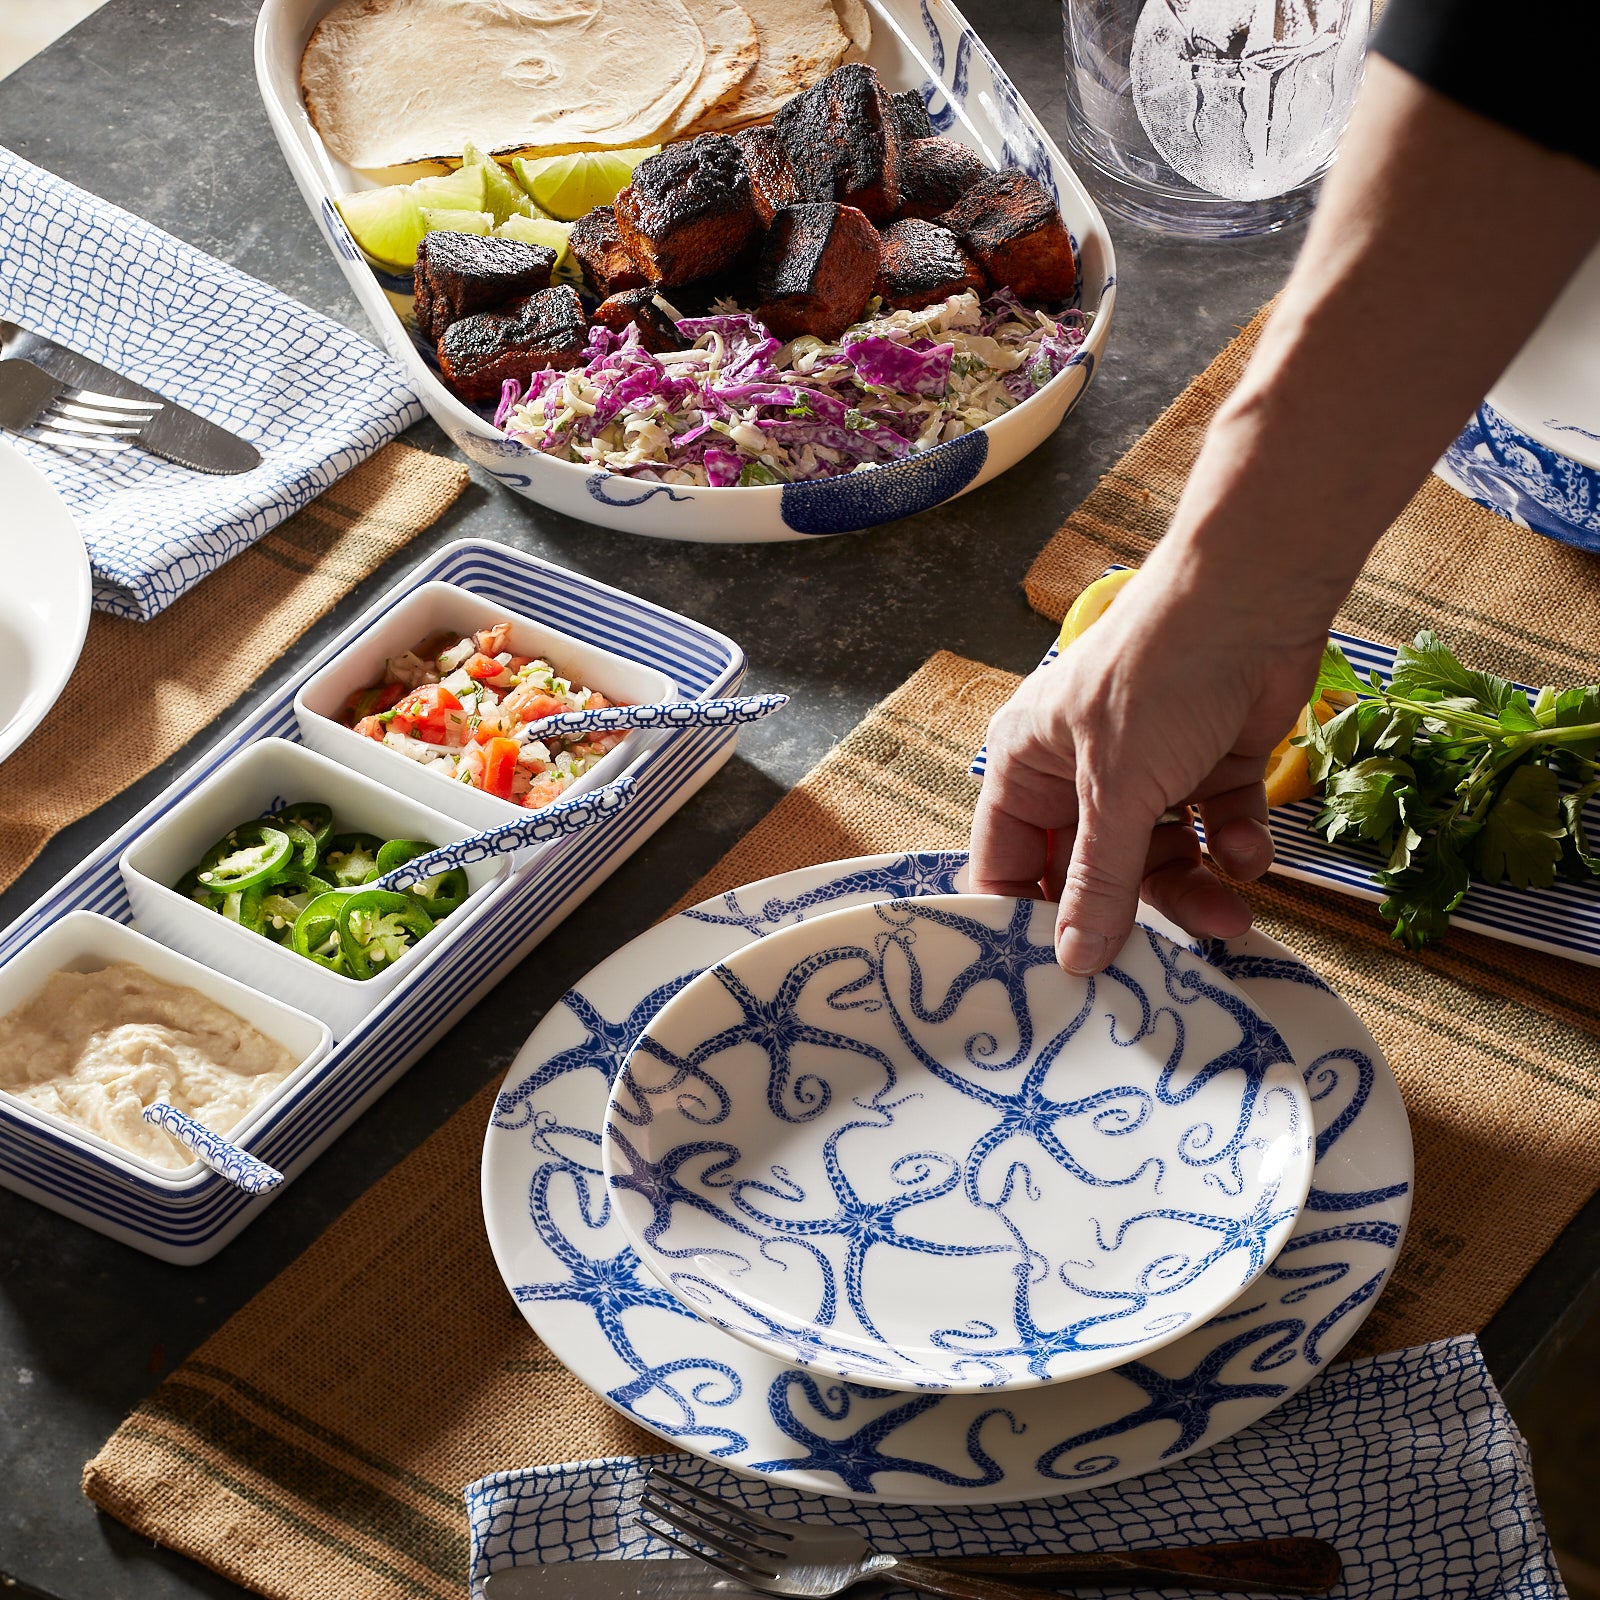 A round Starfish Coupe Salad Plate crafted from premium porcelain, adorned with a charming blue starfish design pattern by Caskata Artisanal Home.